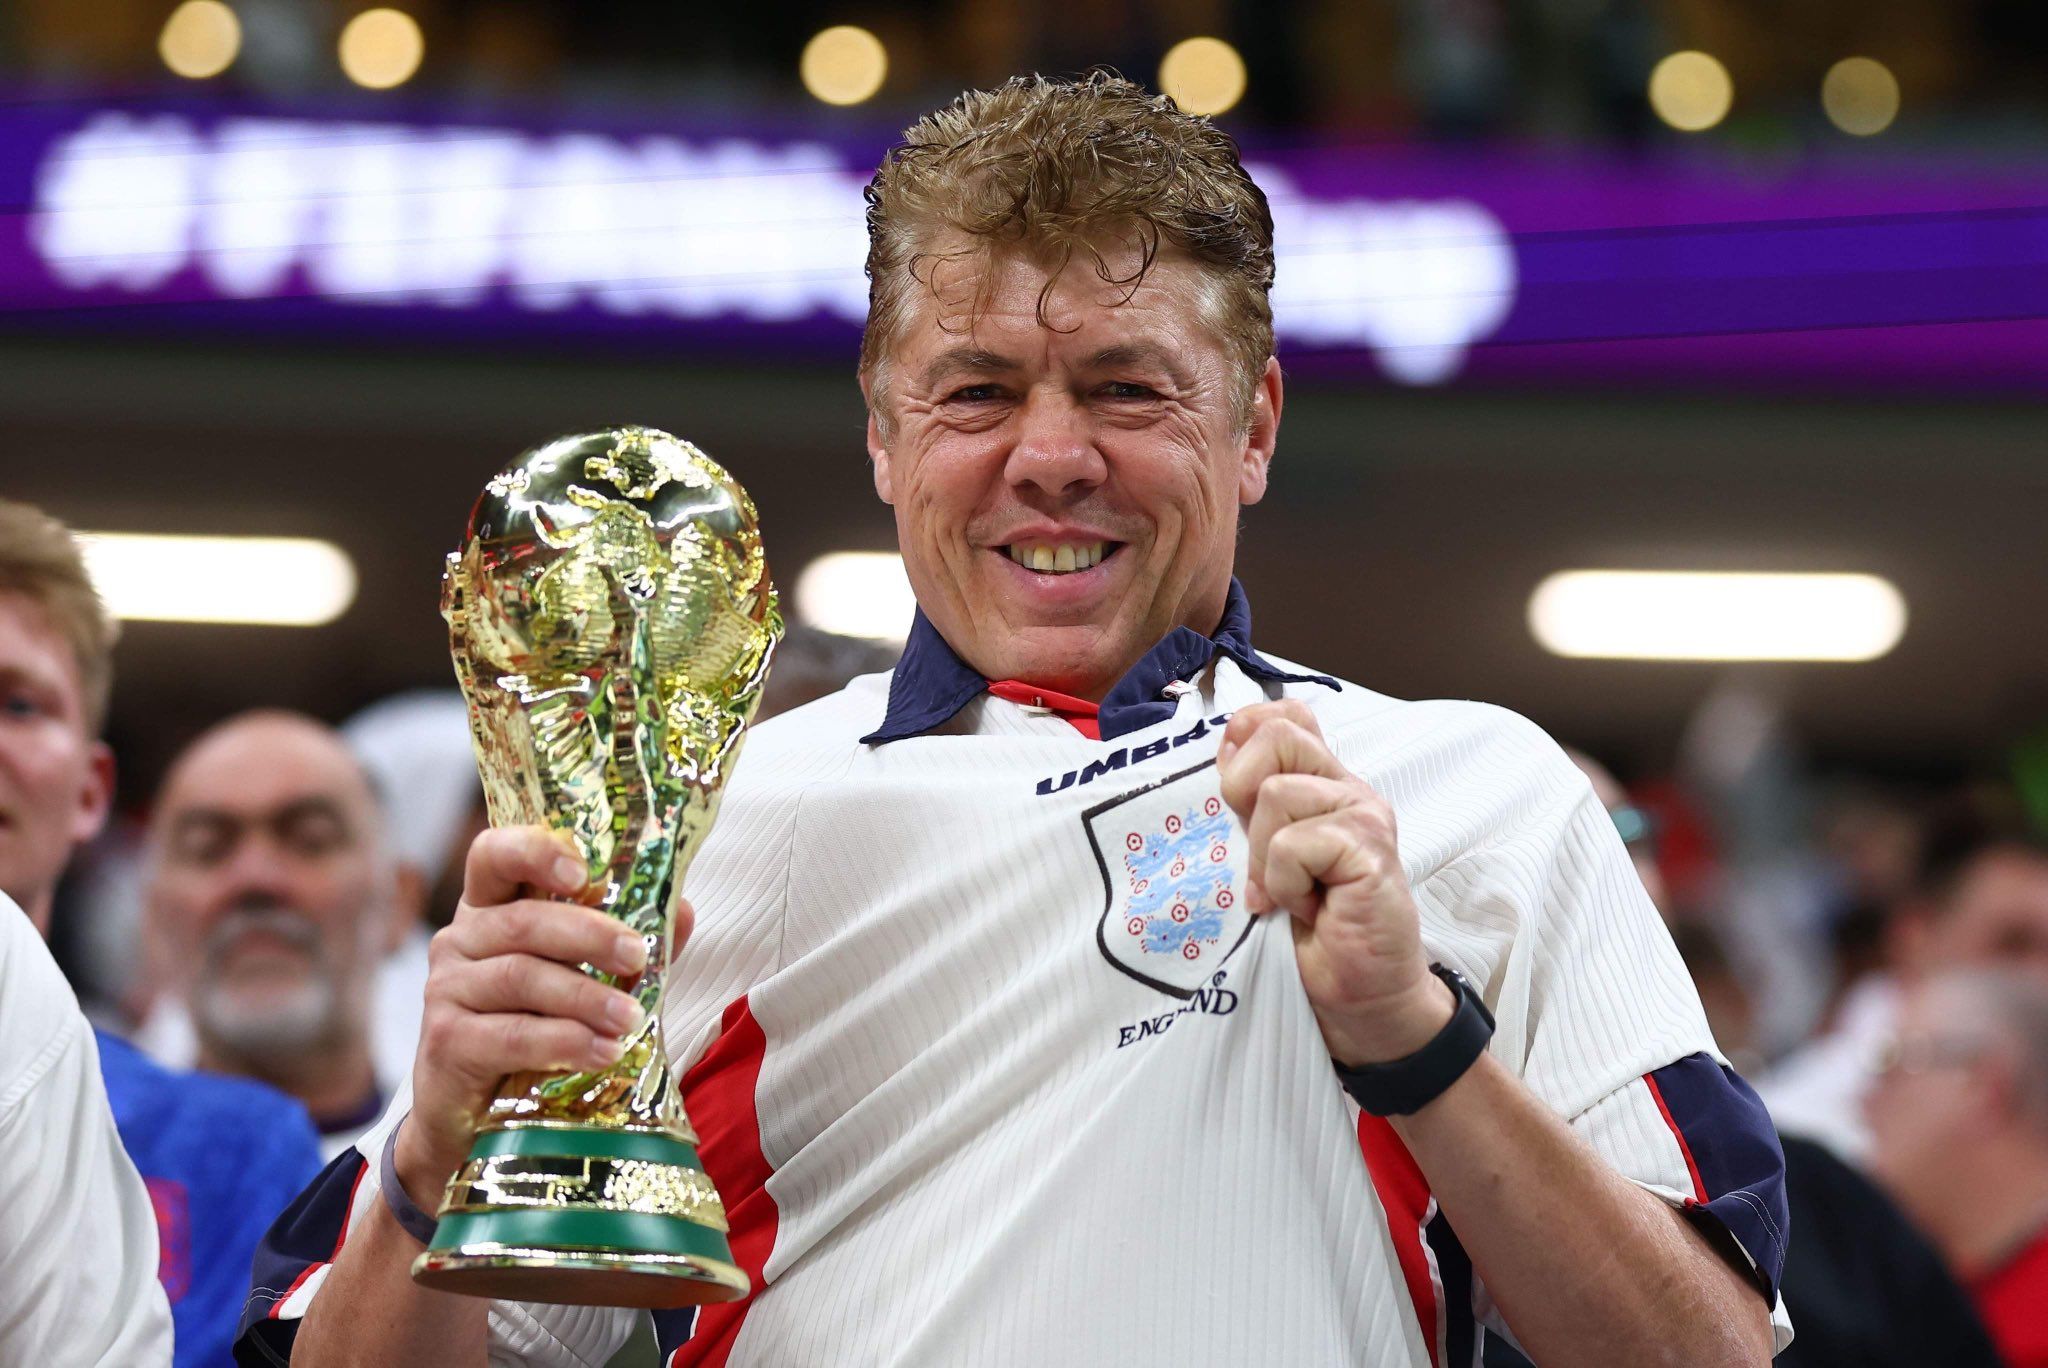 Steve Mclaren lookalike spotted at England vs France FIFA World Cup 2022 quarterfinal: Watch